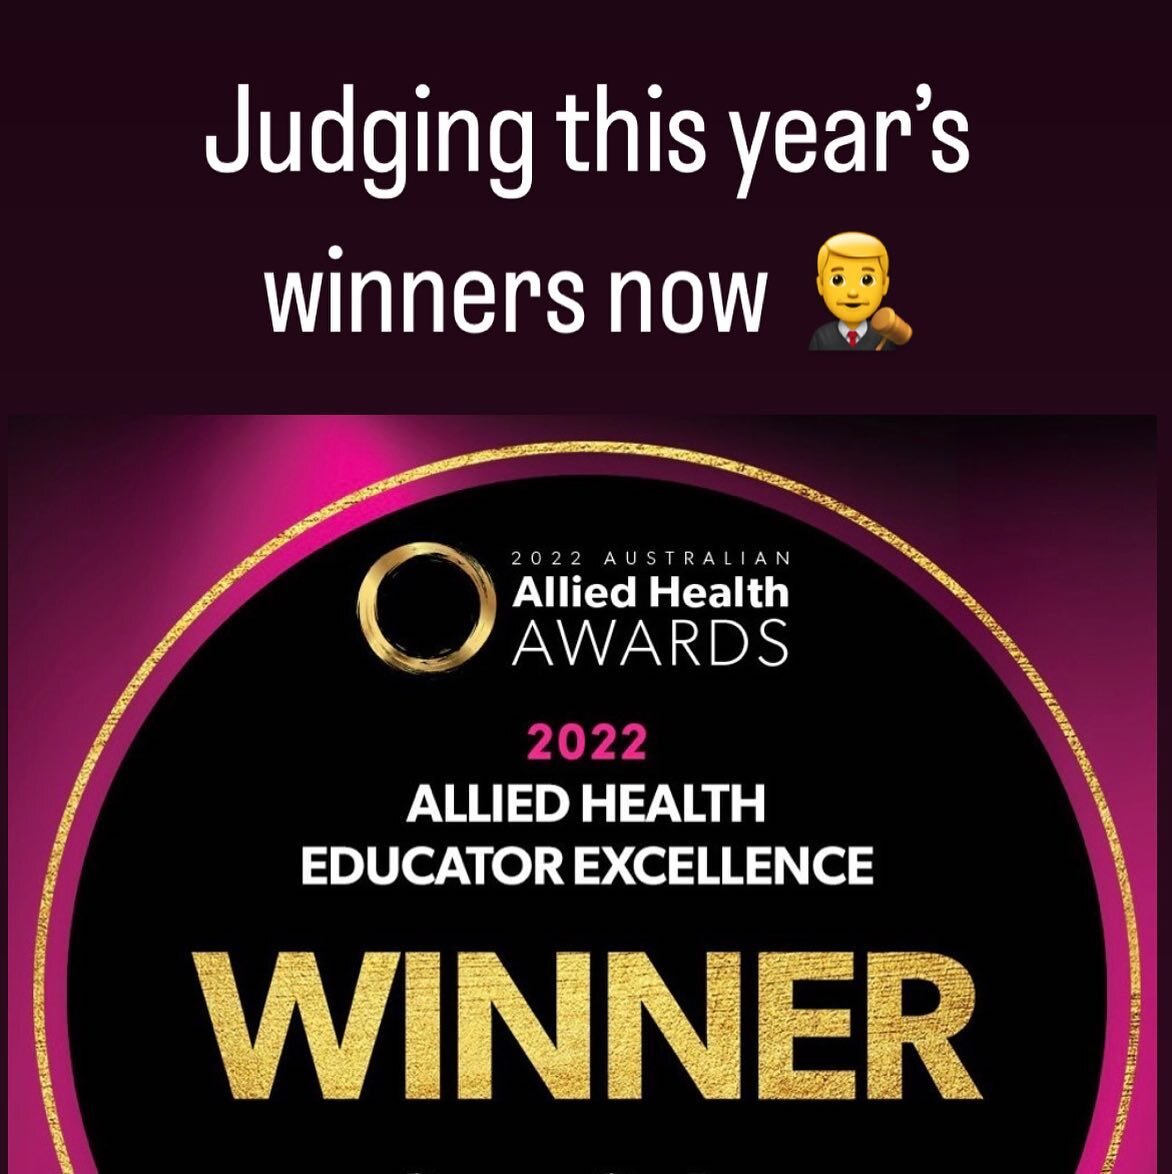 We were awarded Allied Health Educator Excellence in 2022 🎉 We are now judging submissions for the 2023 Australian @alliedhealthawards 🏆 The rules prevent @exercisethought from winning in consecutive years and so we wish the 2023 nominees good luck